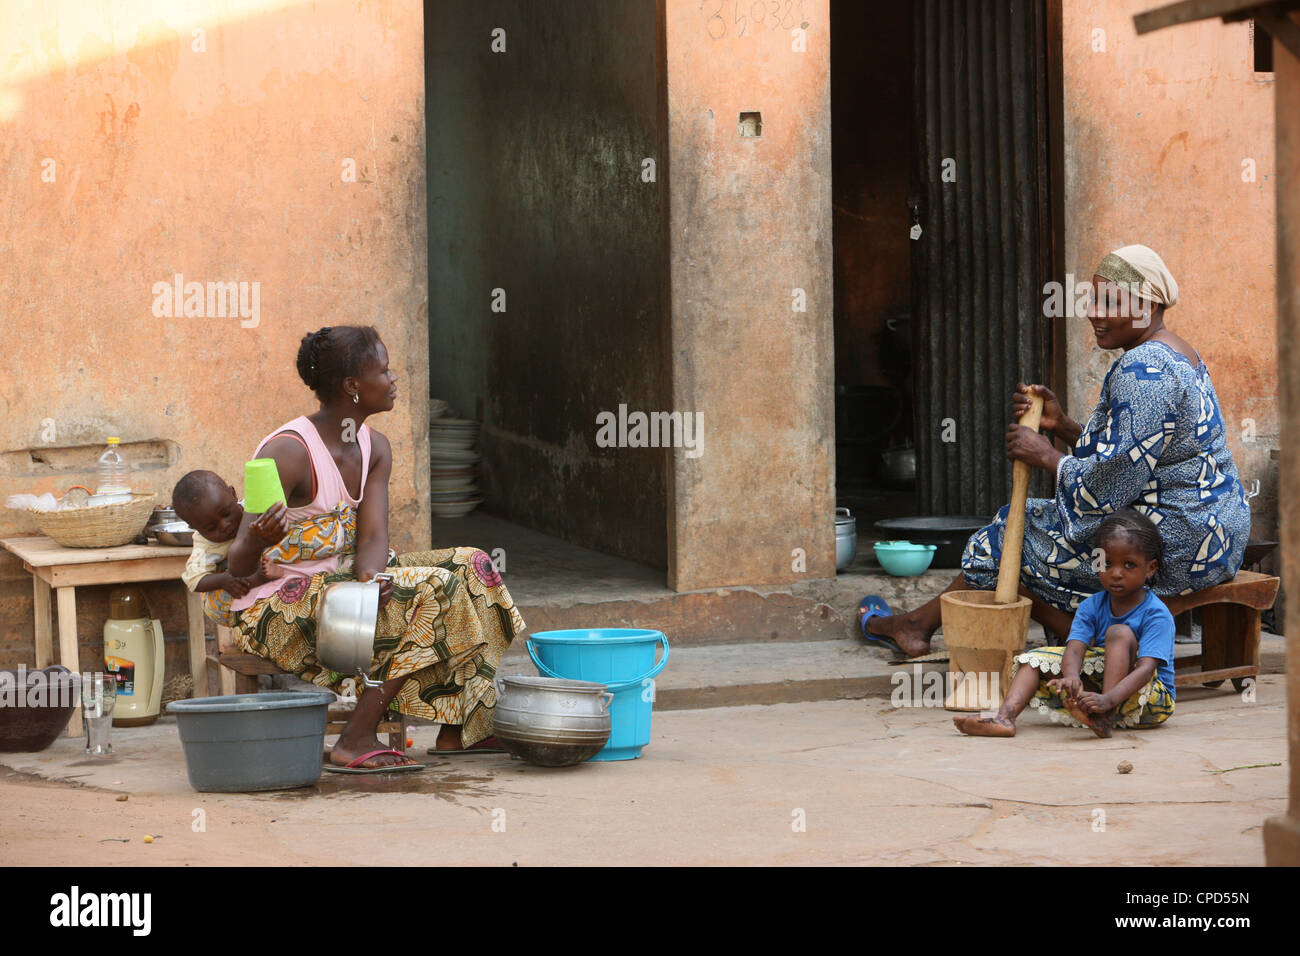 African kitchen, Lome, Togo, West Africa, Africa Stock Photo